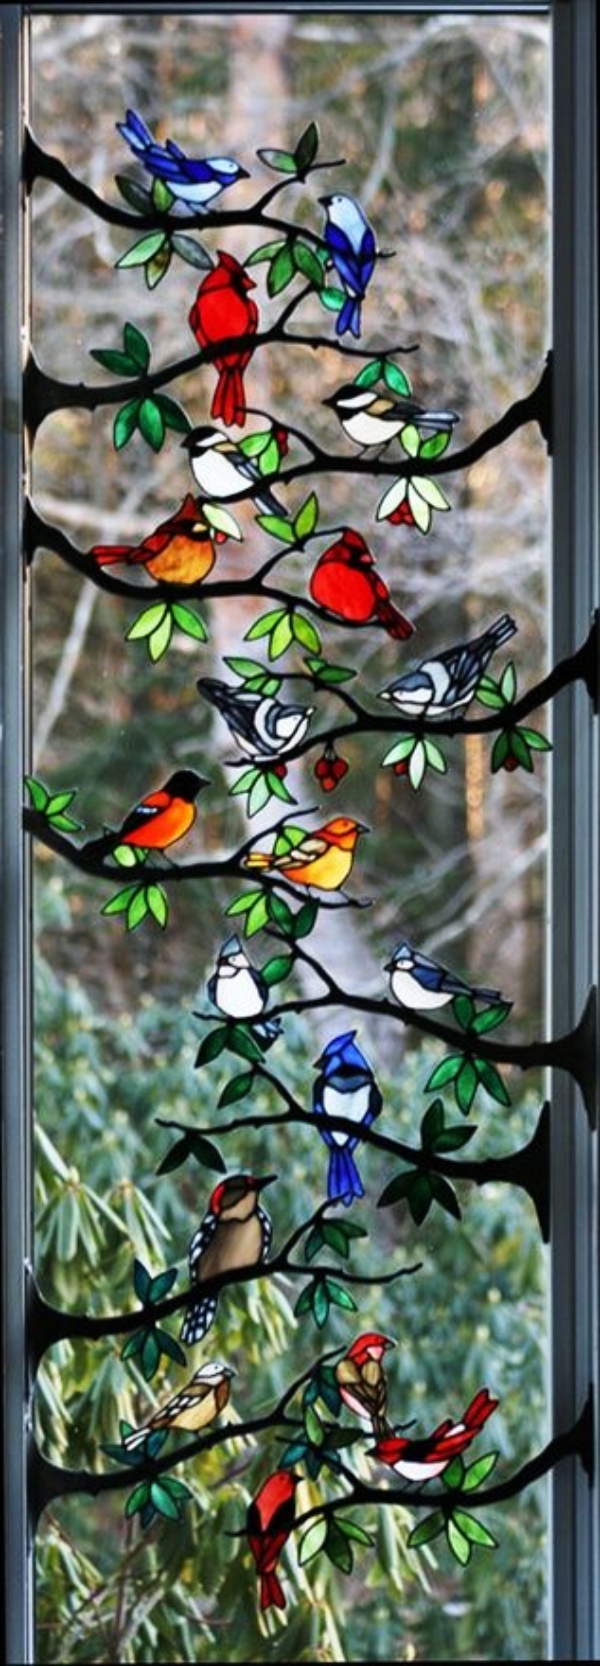 GLASS-PAINTING-IDEAS-AND-DESIGNS-FOR-BEGINNERS